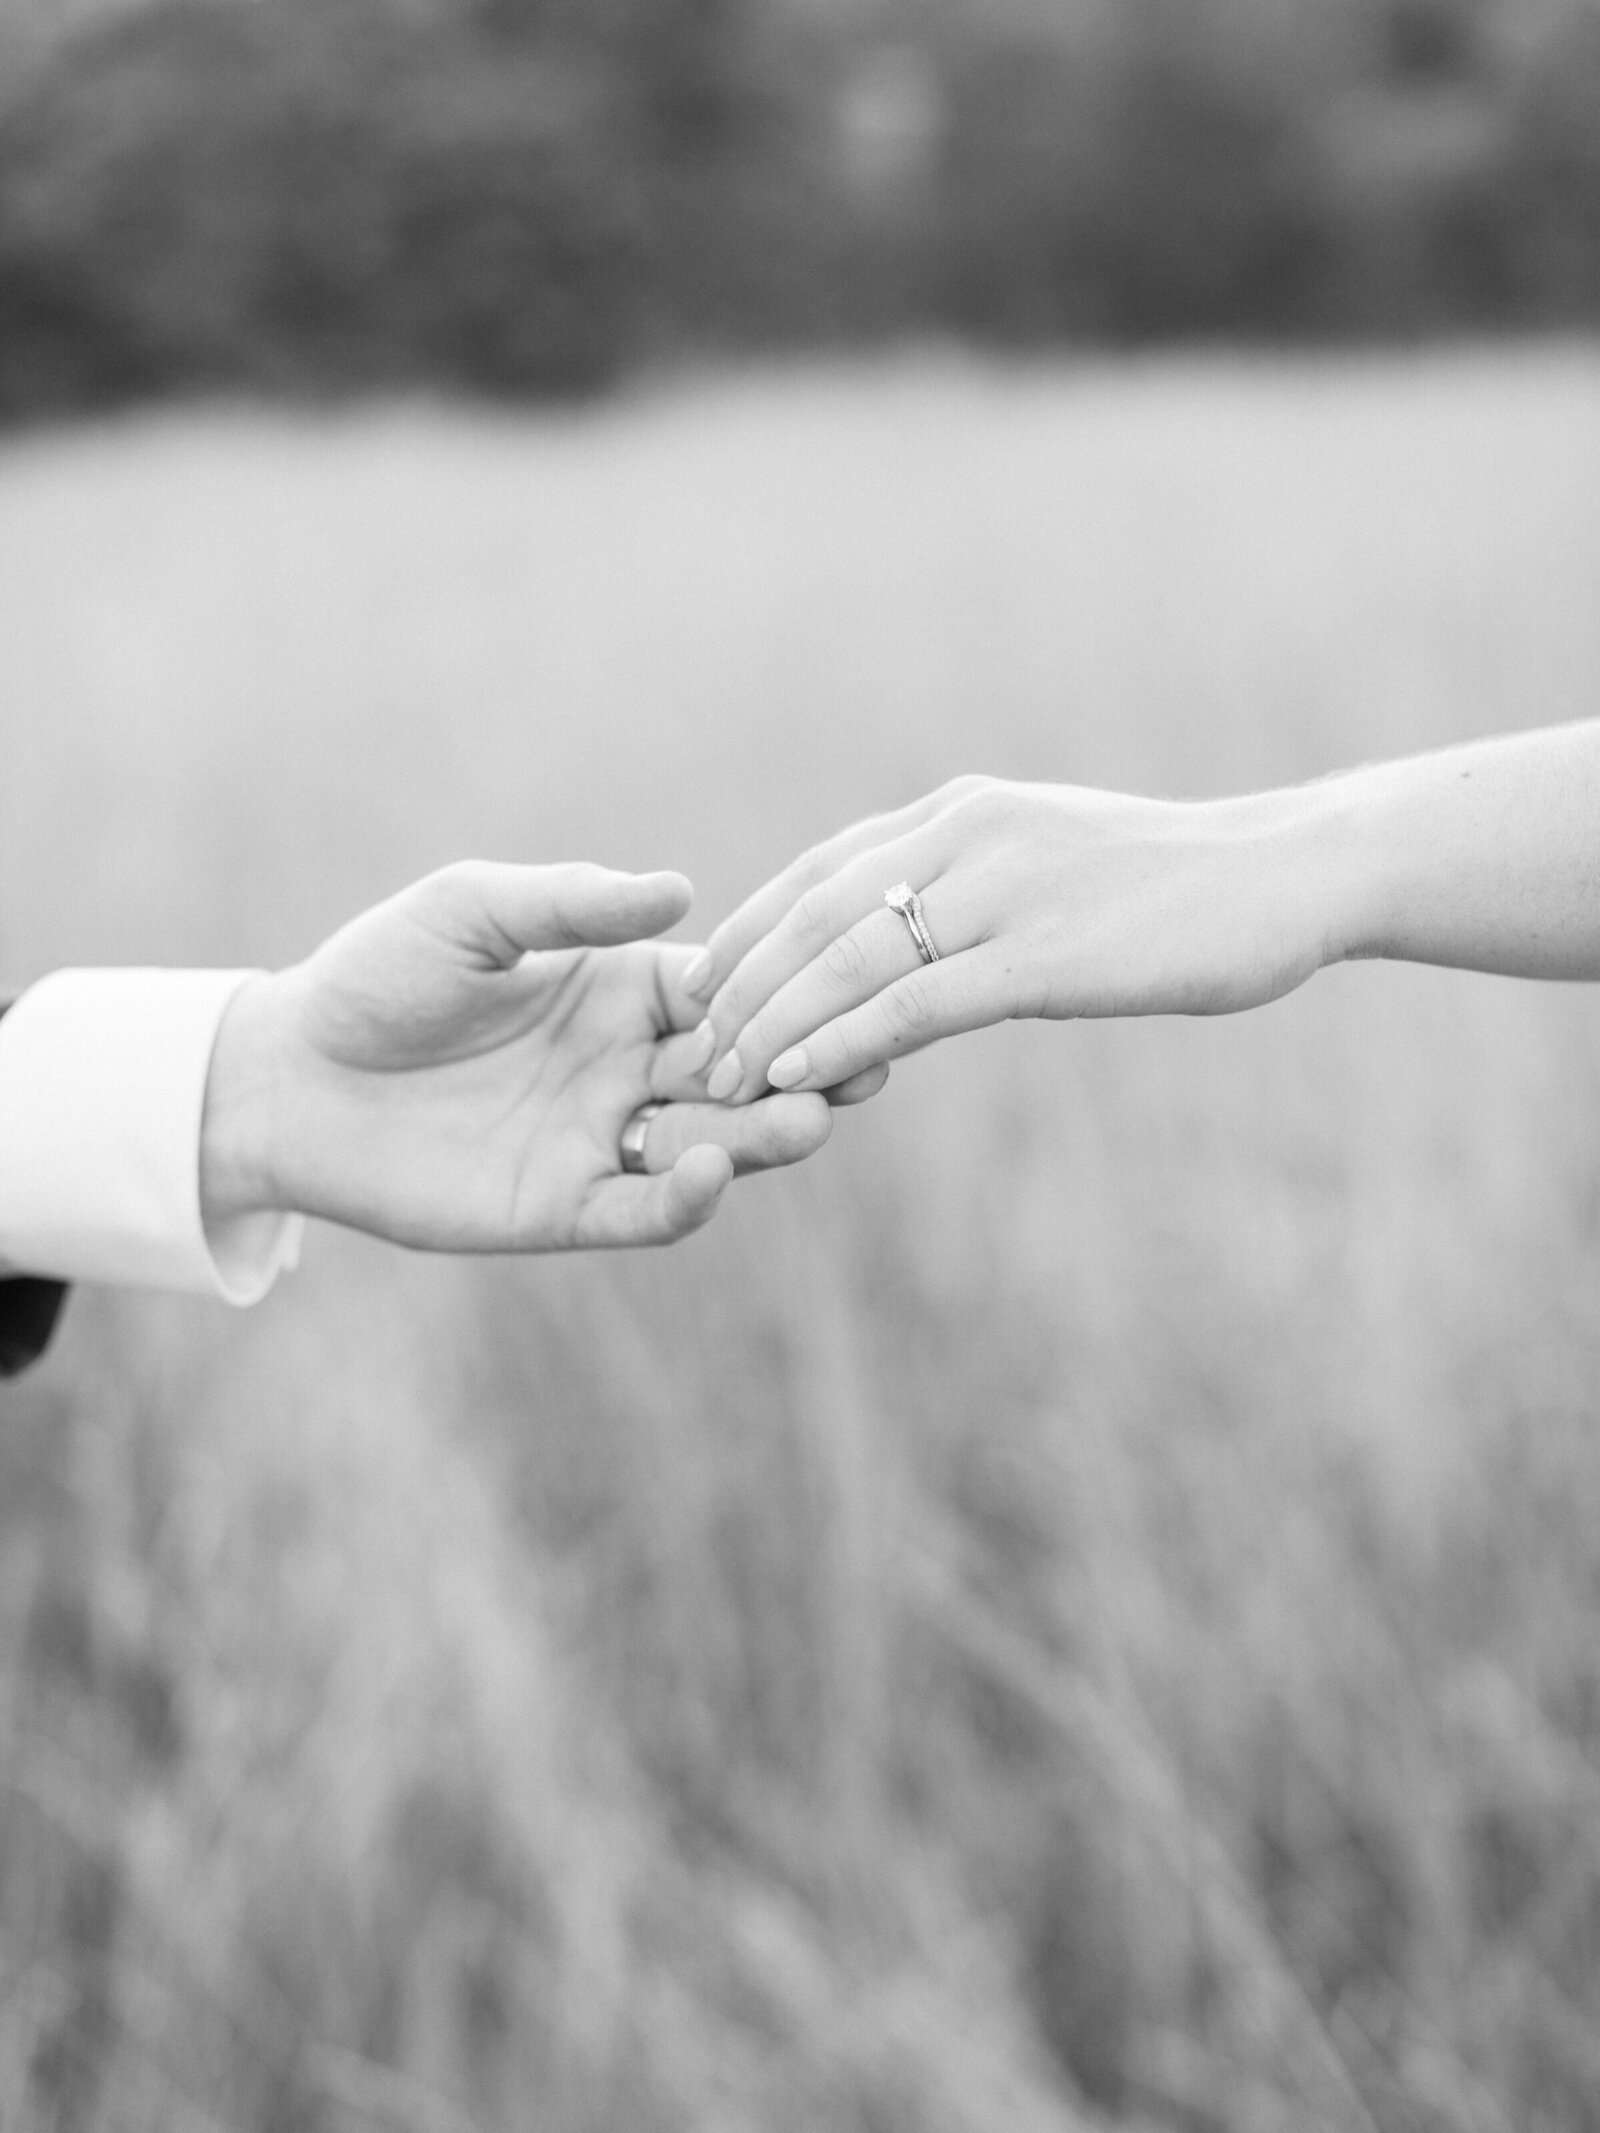 Editorial picture of a bride and grooms hands